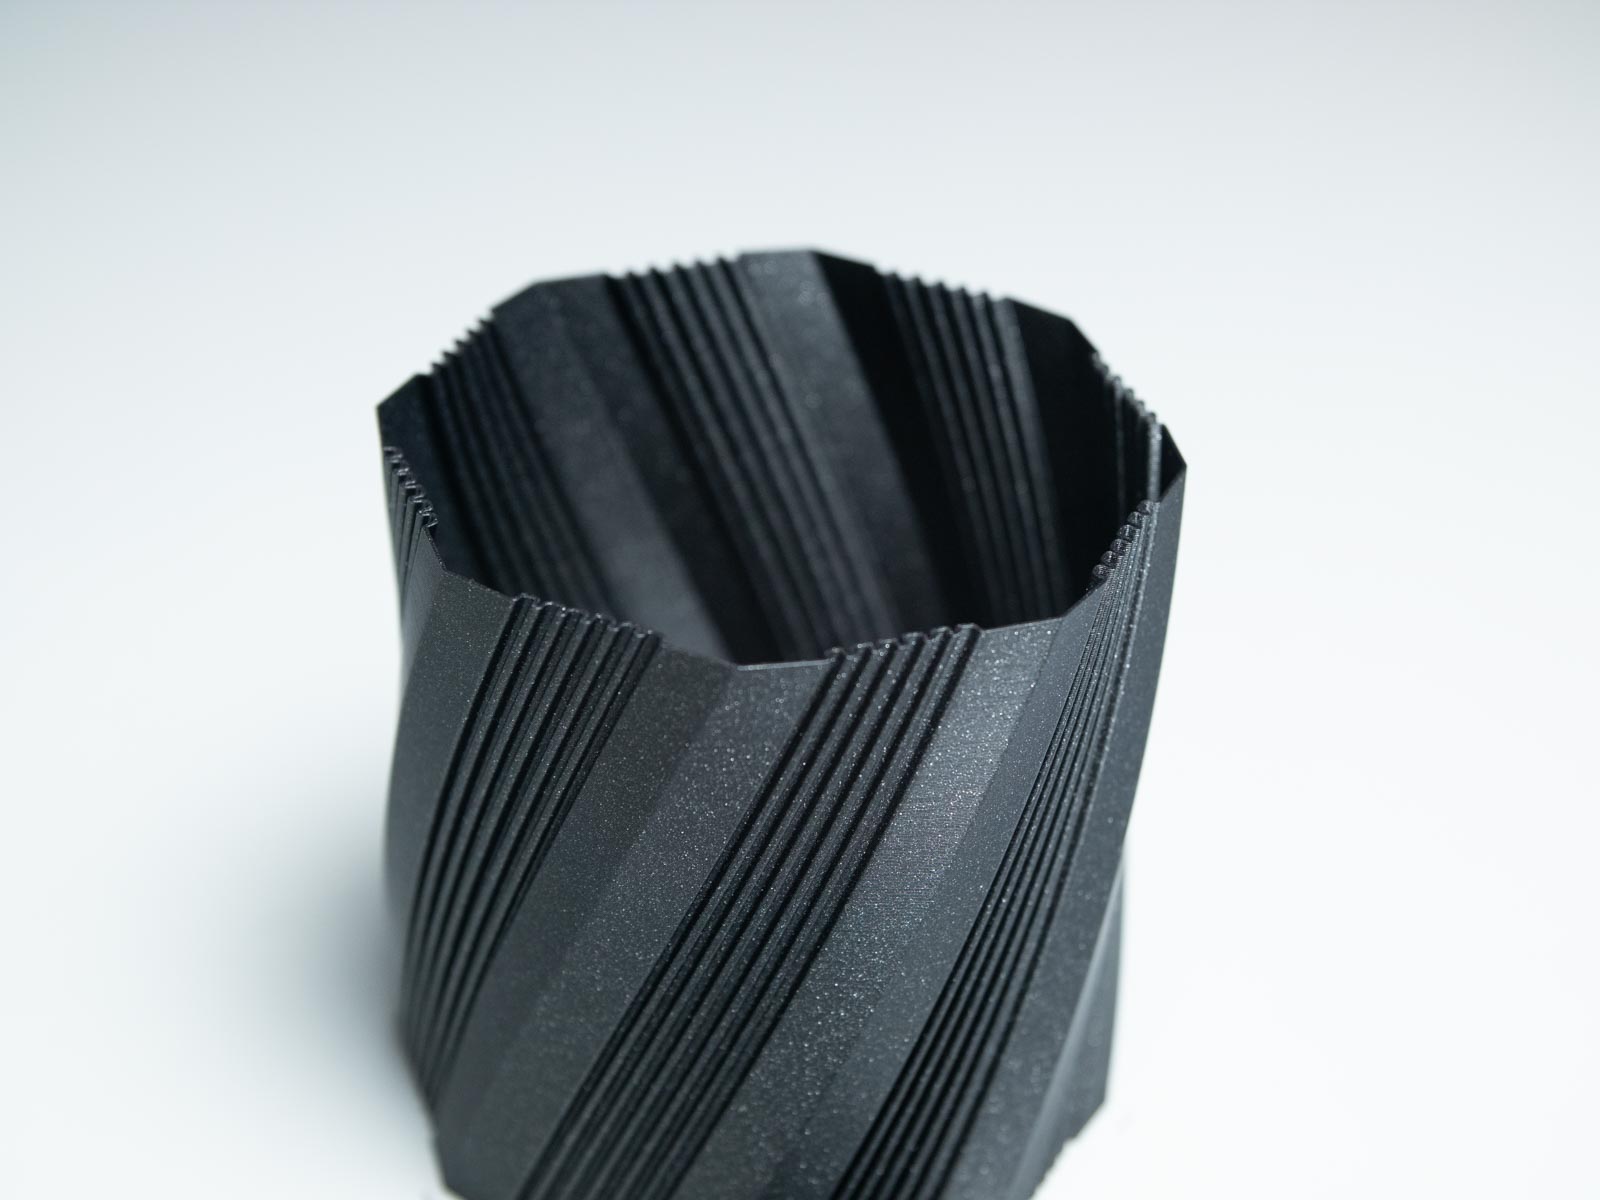 3D Printed Planter and Pot for Ikea Fejka - Vase BETH